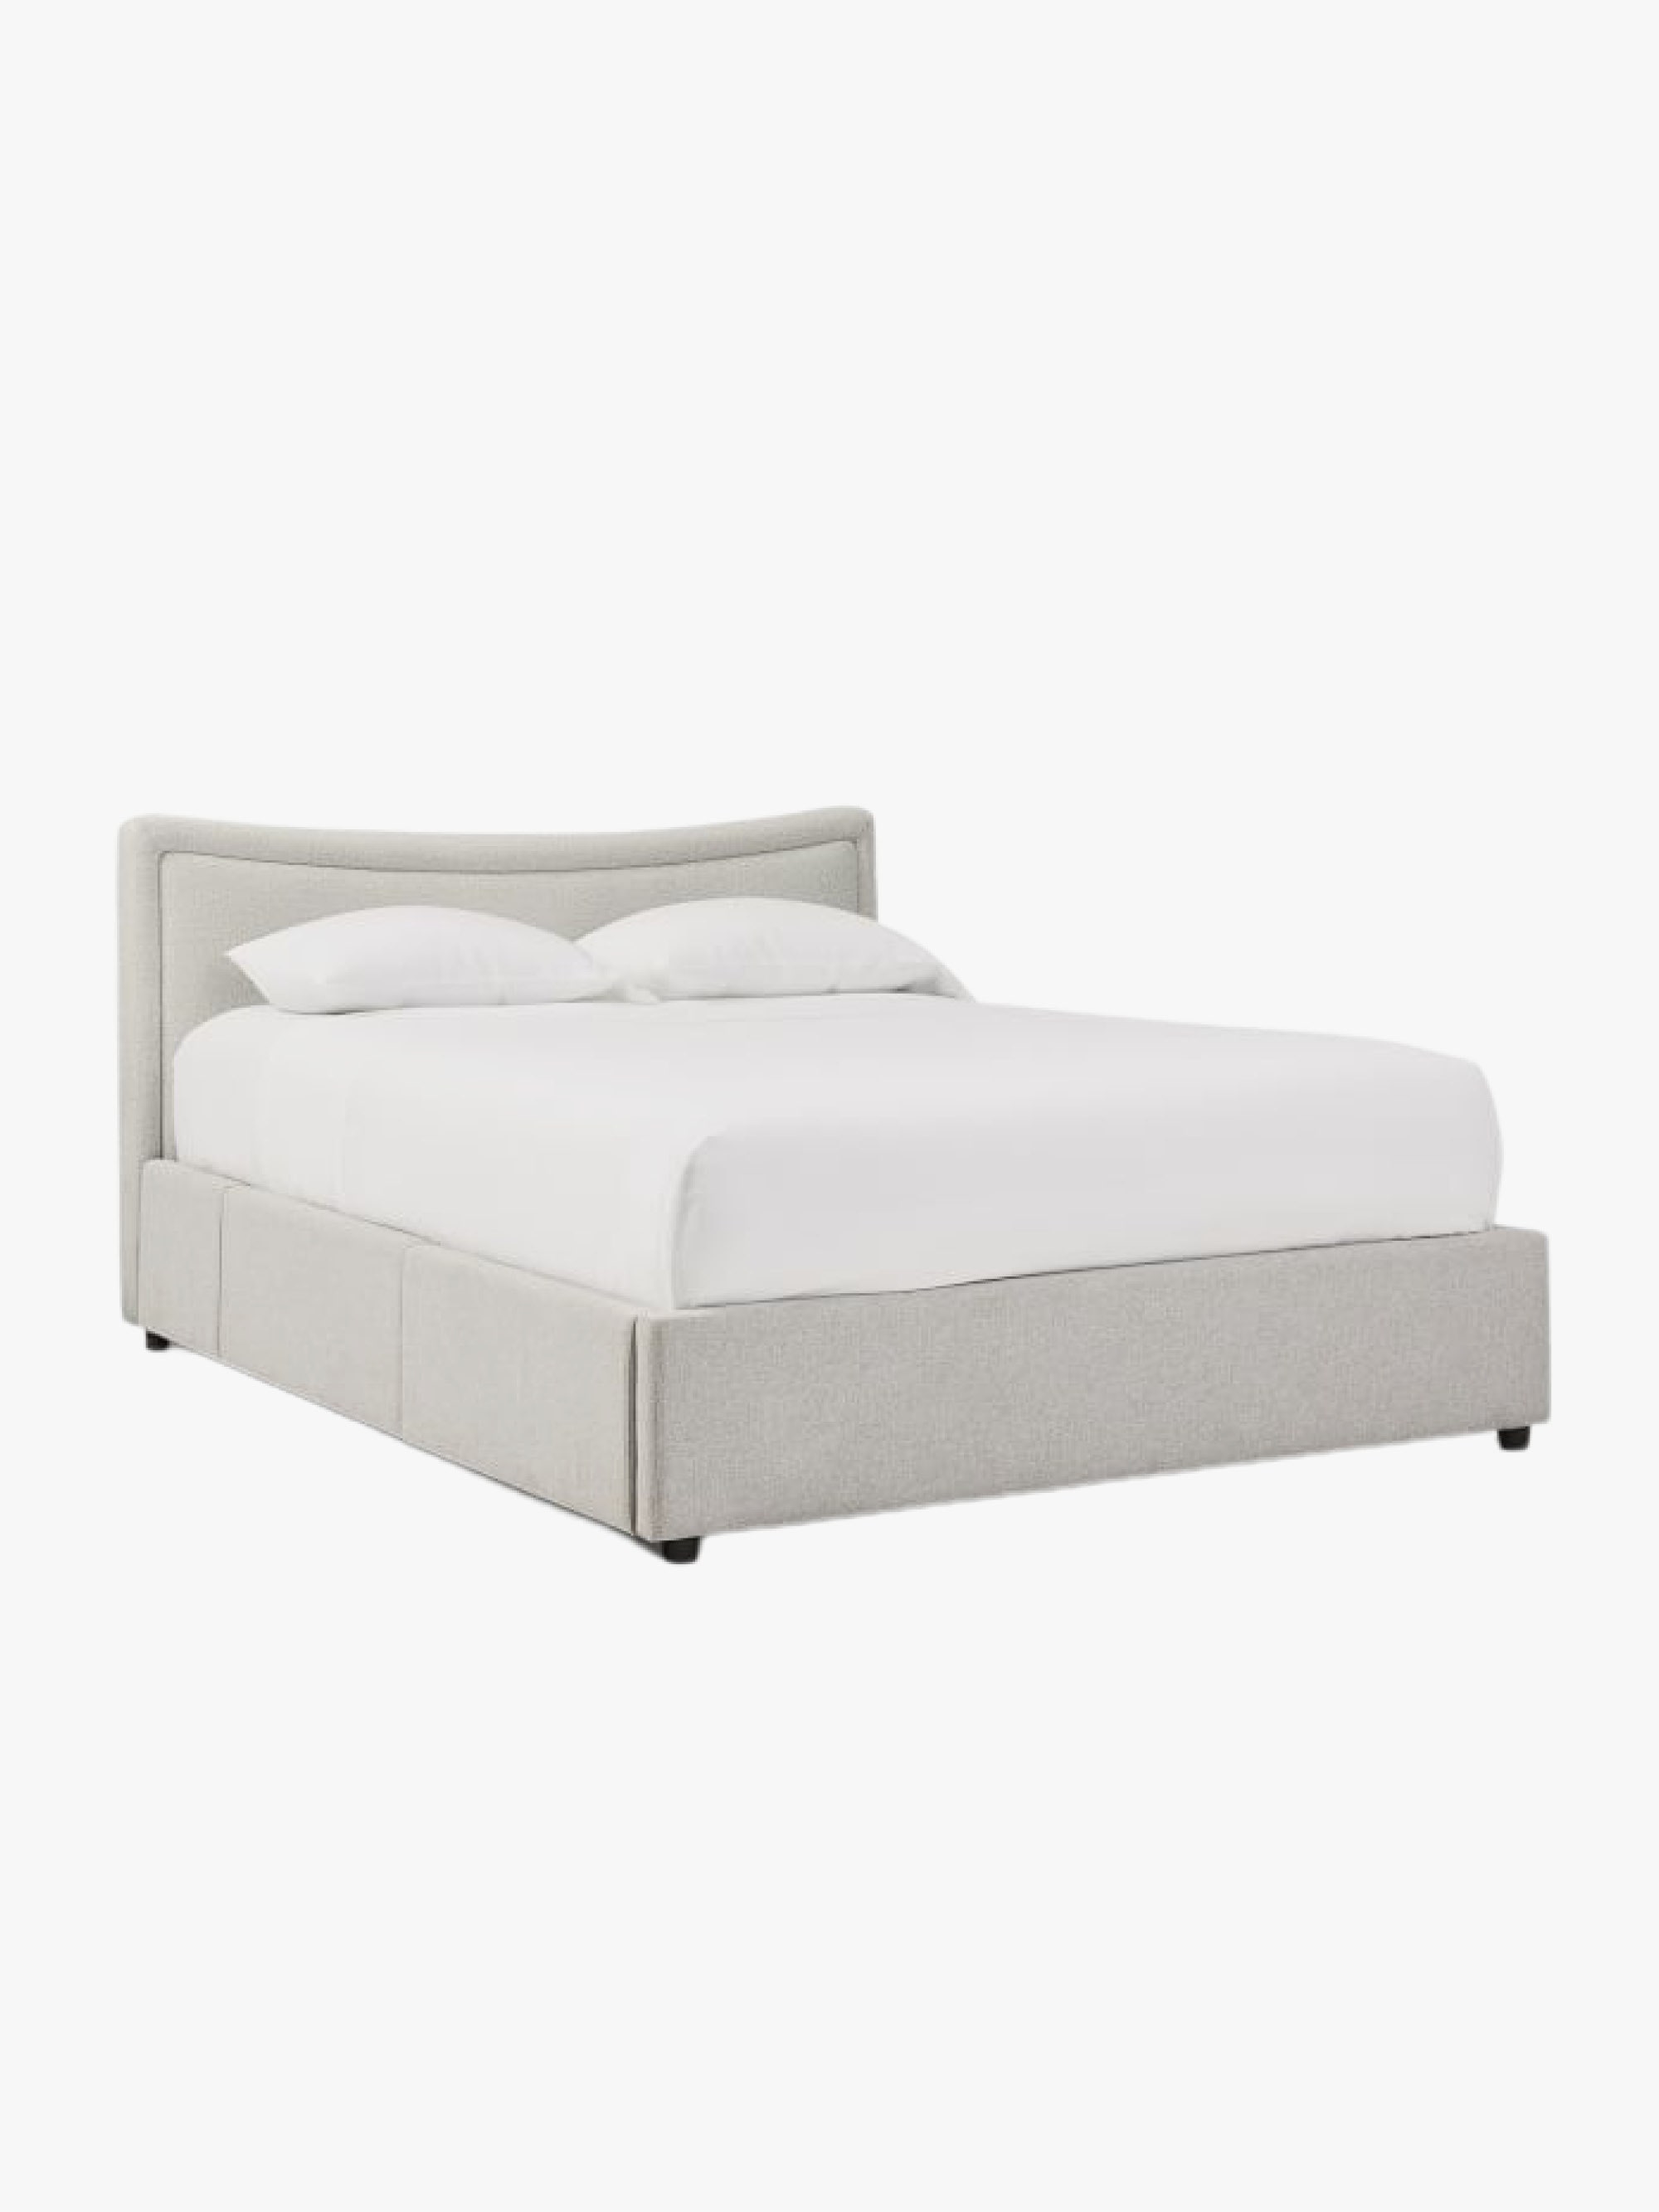 <p>The slight bend of the headboard gives this <a href="https://www.architecturaldigest.com/gallery/the-best-platform-beds?mbid=synd_msn_rss&utm_source=msn&utm_medium=syndication">platform bed</a> a touch of midcentury-modern style. The underbed drawers offer the smoothest of glides and practically melt into the design, hiding your extra storage from the naked eye. Plus, you have many upholstery options to peruse, from performance velvet and chenille tweed to bouclé. There are also three leg options: dark pewter, light bronze, or a no-show design. If you want a high-quality statement <a href="https://www.architecturaldigest.com/gallery/best-bed-frames-2023?mbid=synd_msn_rss&utm_source=msn&utm_medium=syndication">bedframe</a> without giving in to the latest trend pieces, this storage bed will stand the test of time.</p> <ul> <li><strong>Sizes available:</strong> Twin, full, queen, king, California king</li> <li><strong>Colors available:</strong> 29 color and fabric choices</li> <li><strong>Storage type:</strong> Four pullout, underbed storage drawers</li> <li><strong>Materials:</strong> Solid pine wood and MDF, polyester frame</li> <li><strong>Weight capacity:</strong> 300 pounds</li> </ul> $2399, West Elm. <a href="https://www.westelm.com/products/myla-side-storage-bed-h8505/?">Get it now!</a><p>Sign up for our newsletter to get the latest in design, decorating, celebrity style, shopping, and more.</p><a href="https://www.architecturaldigest.com/newsletter/subscribe?sourceCode=msnsend">Sign Up Now</a>